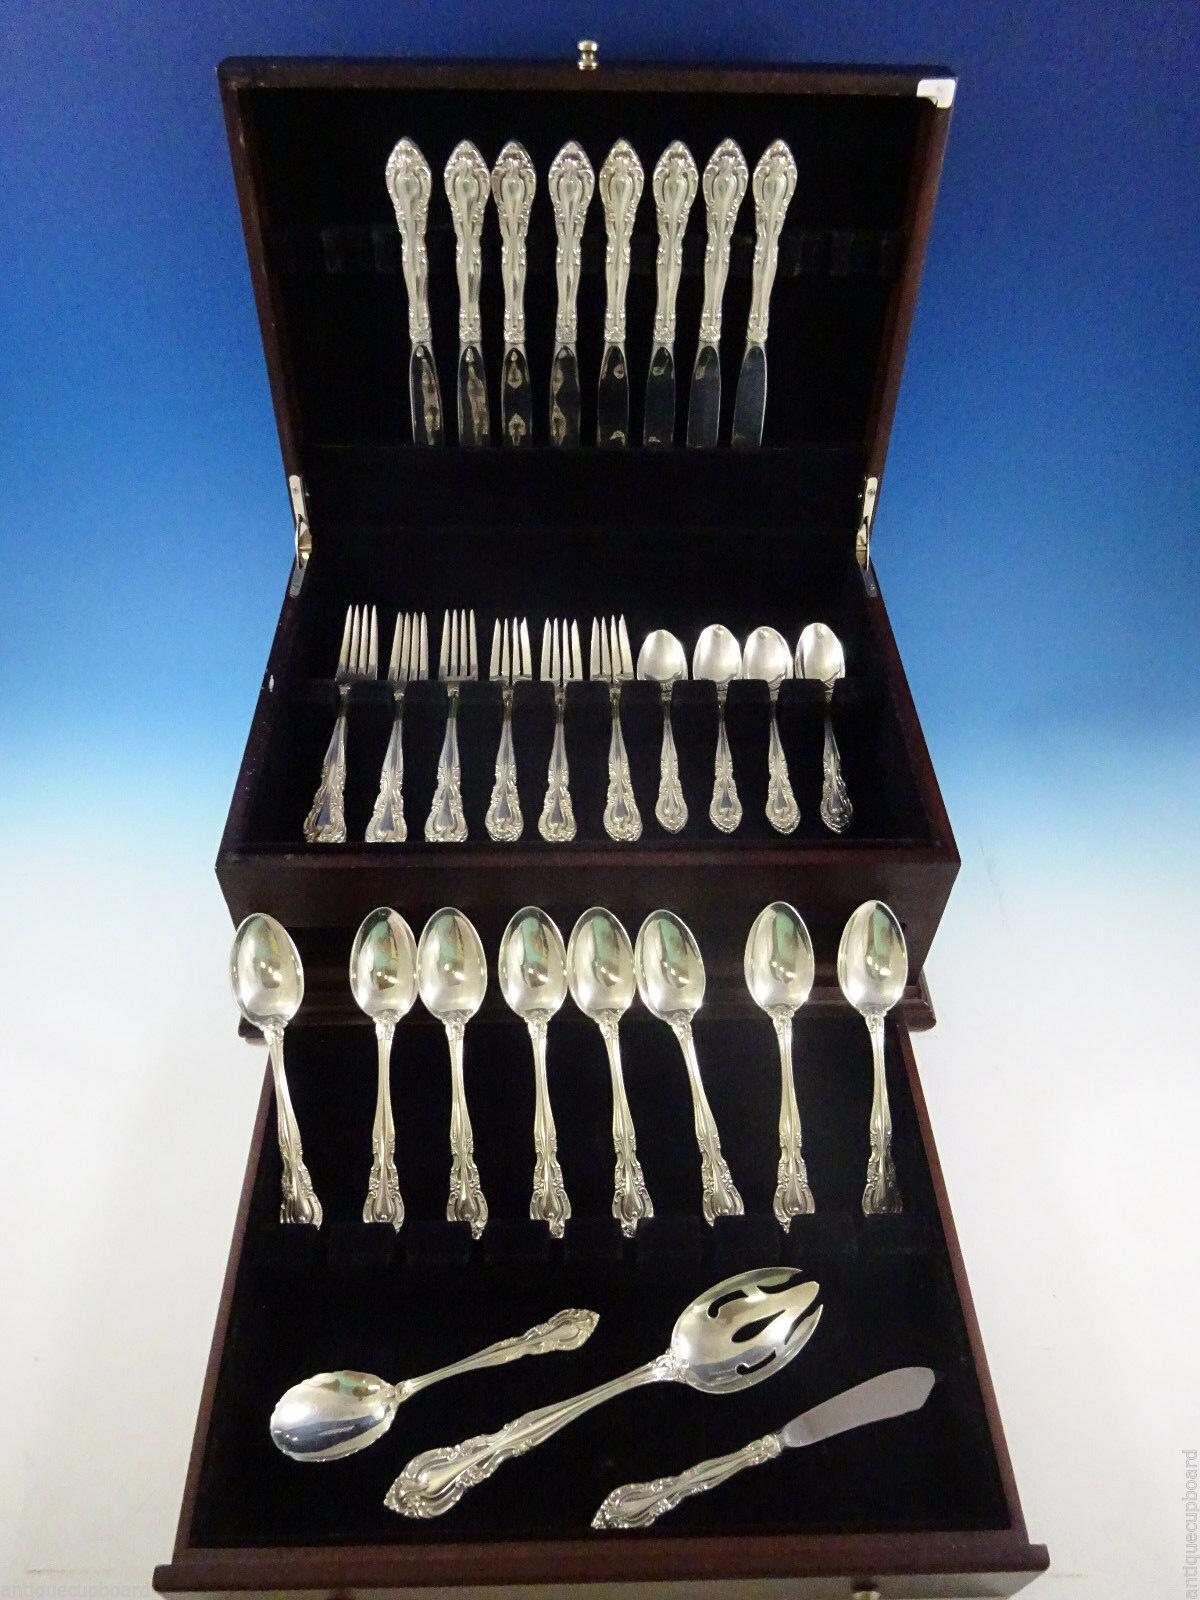 Vivaldi by Alvin sterling silver flatware set, 43 pieces. This set includes:

8 knives, 9 1/4